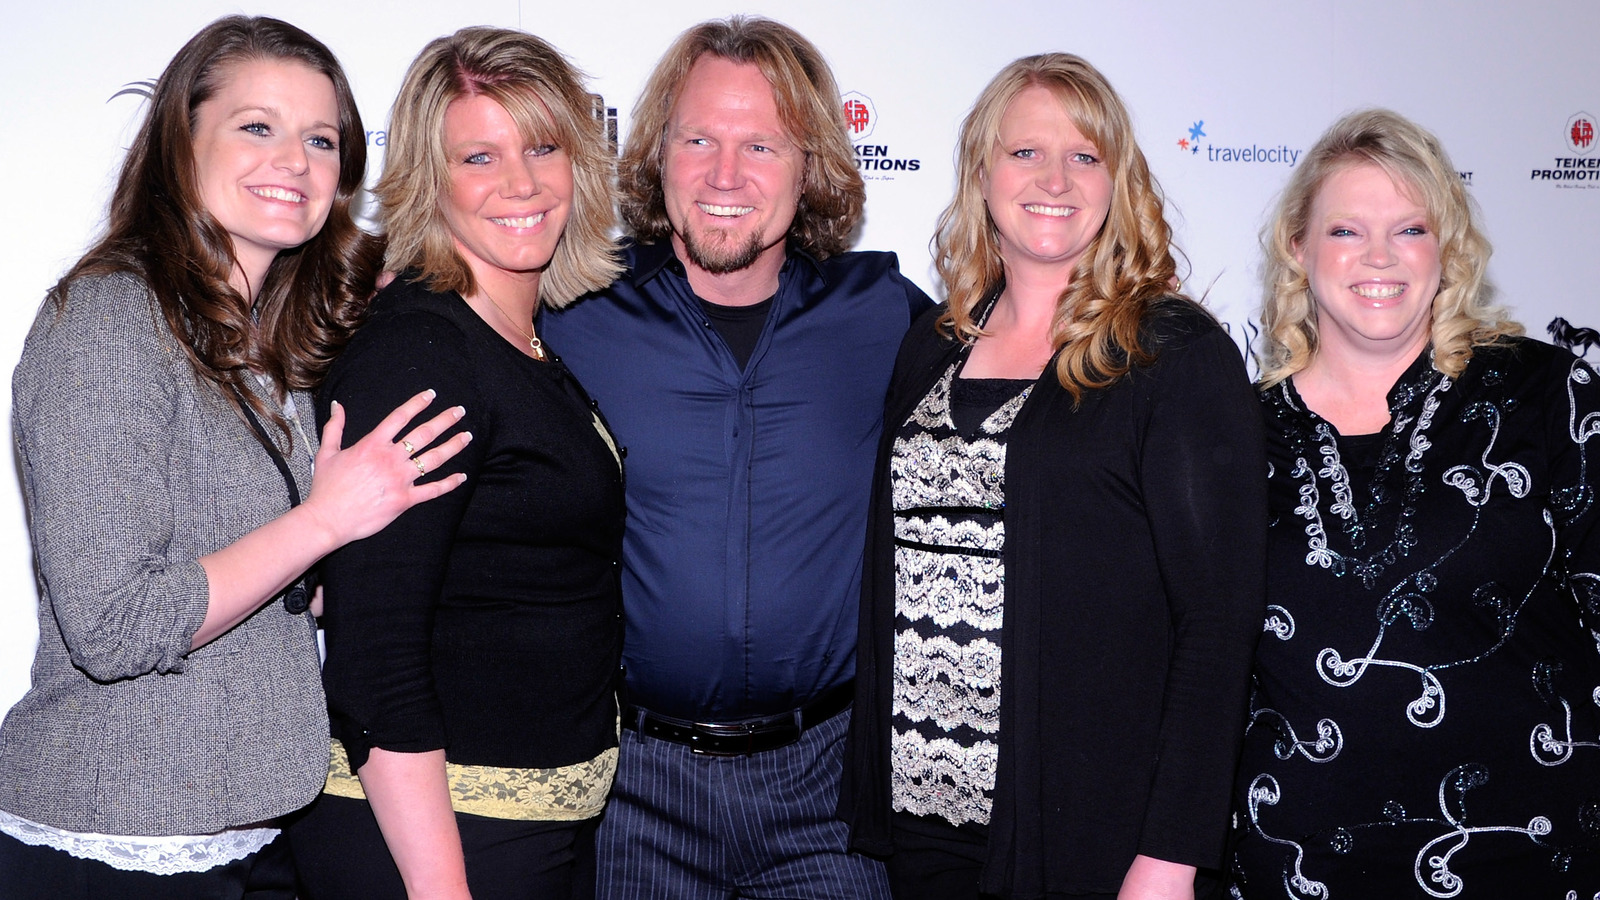 Here's why Sister Wives star Kody Brown had to file for bankruptcy